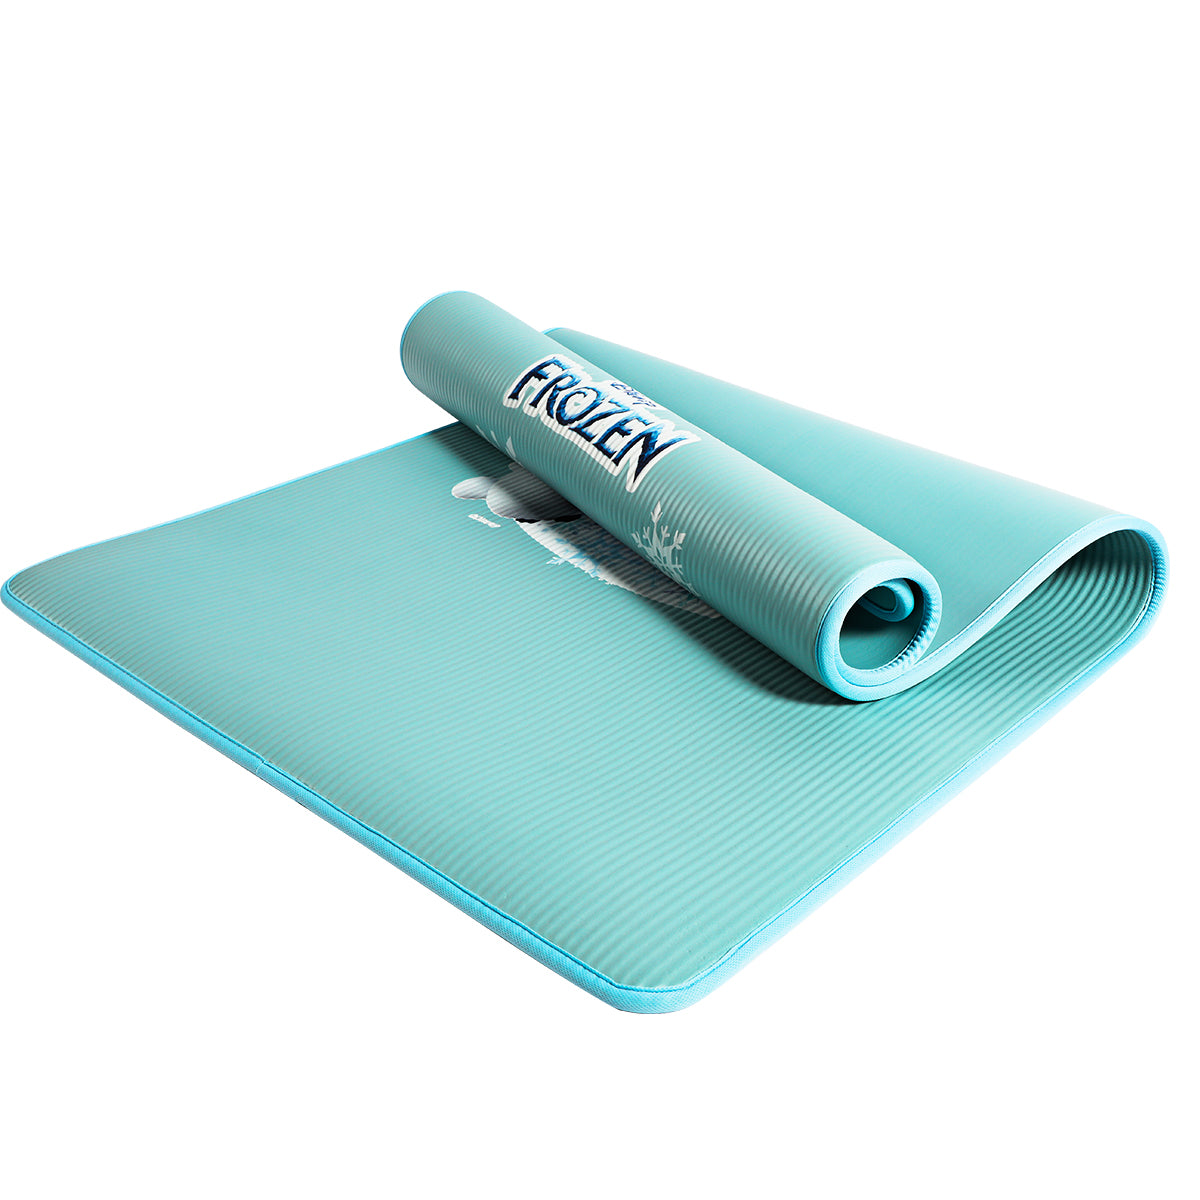 Disney NBR yoga mat with fabric binding soft Extra Thick Yoga Mat for Women Men Kids, Workout Mat with Carrying Strap for Yoga, Pilates and Floor Exercises